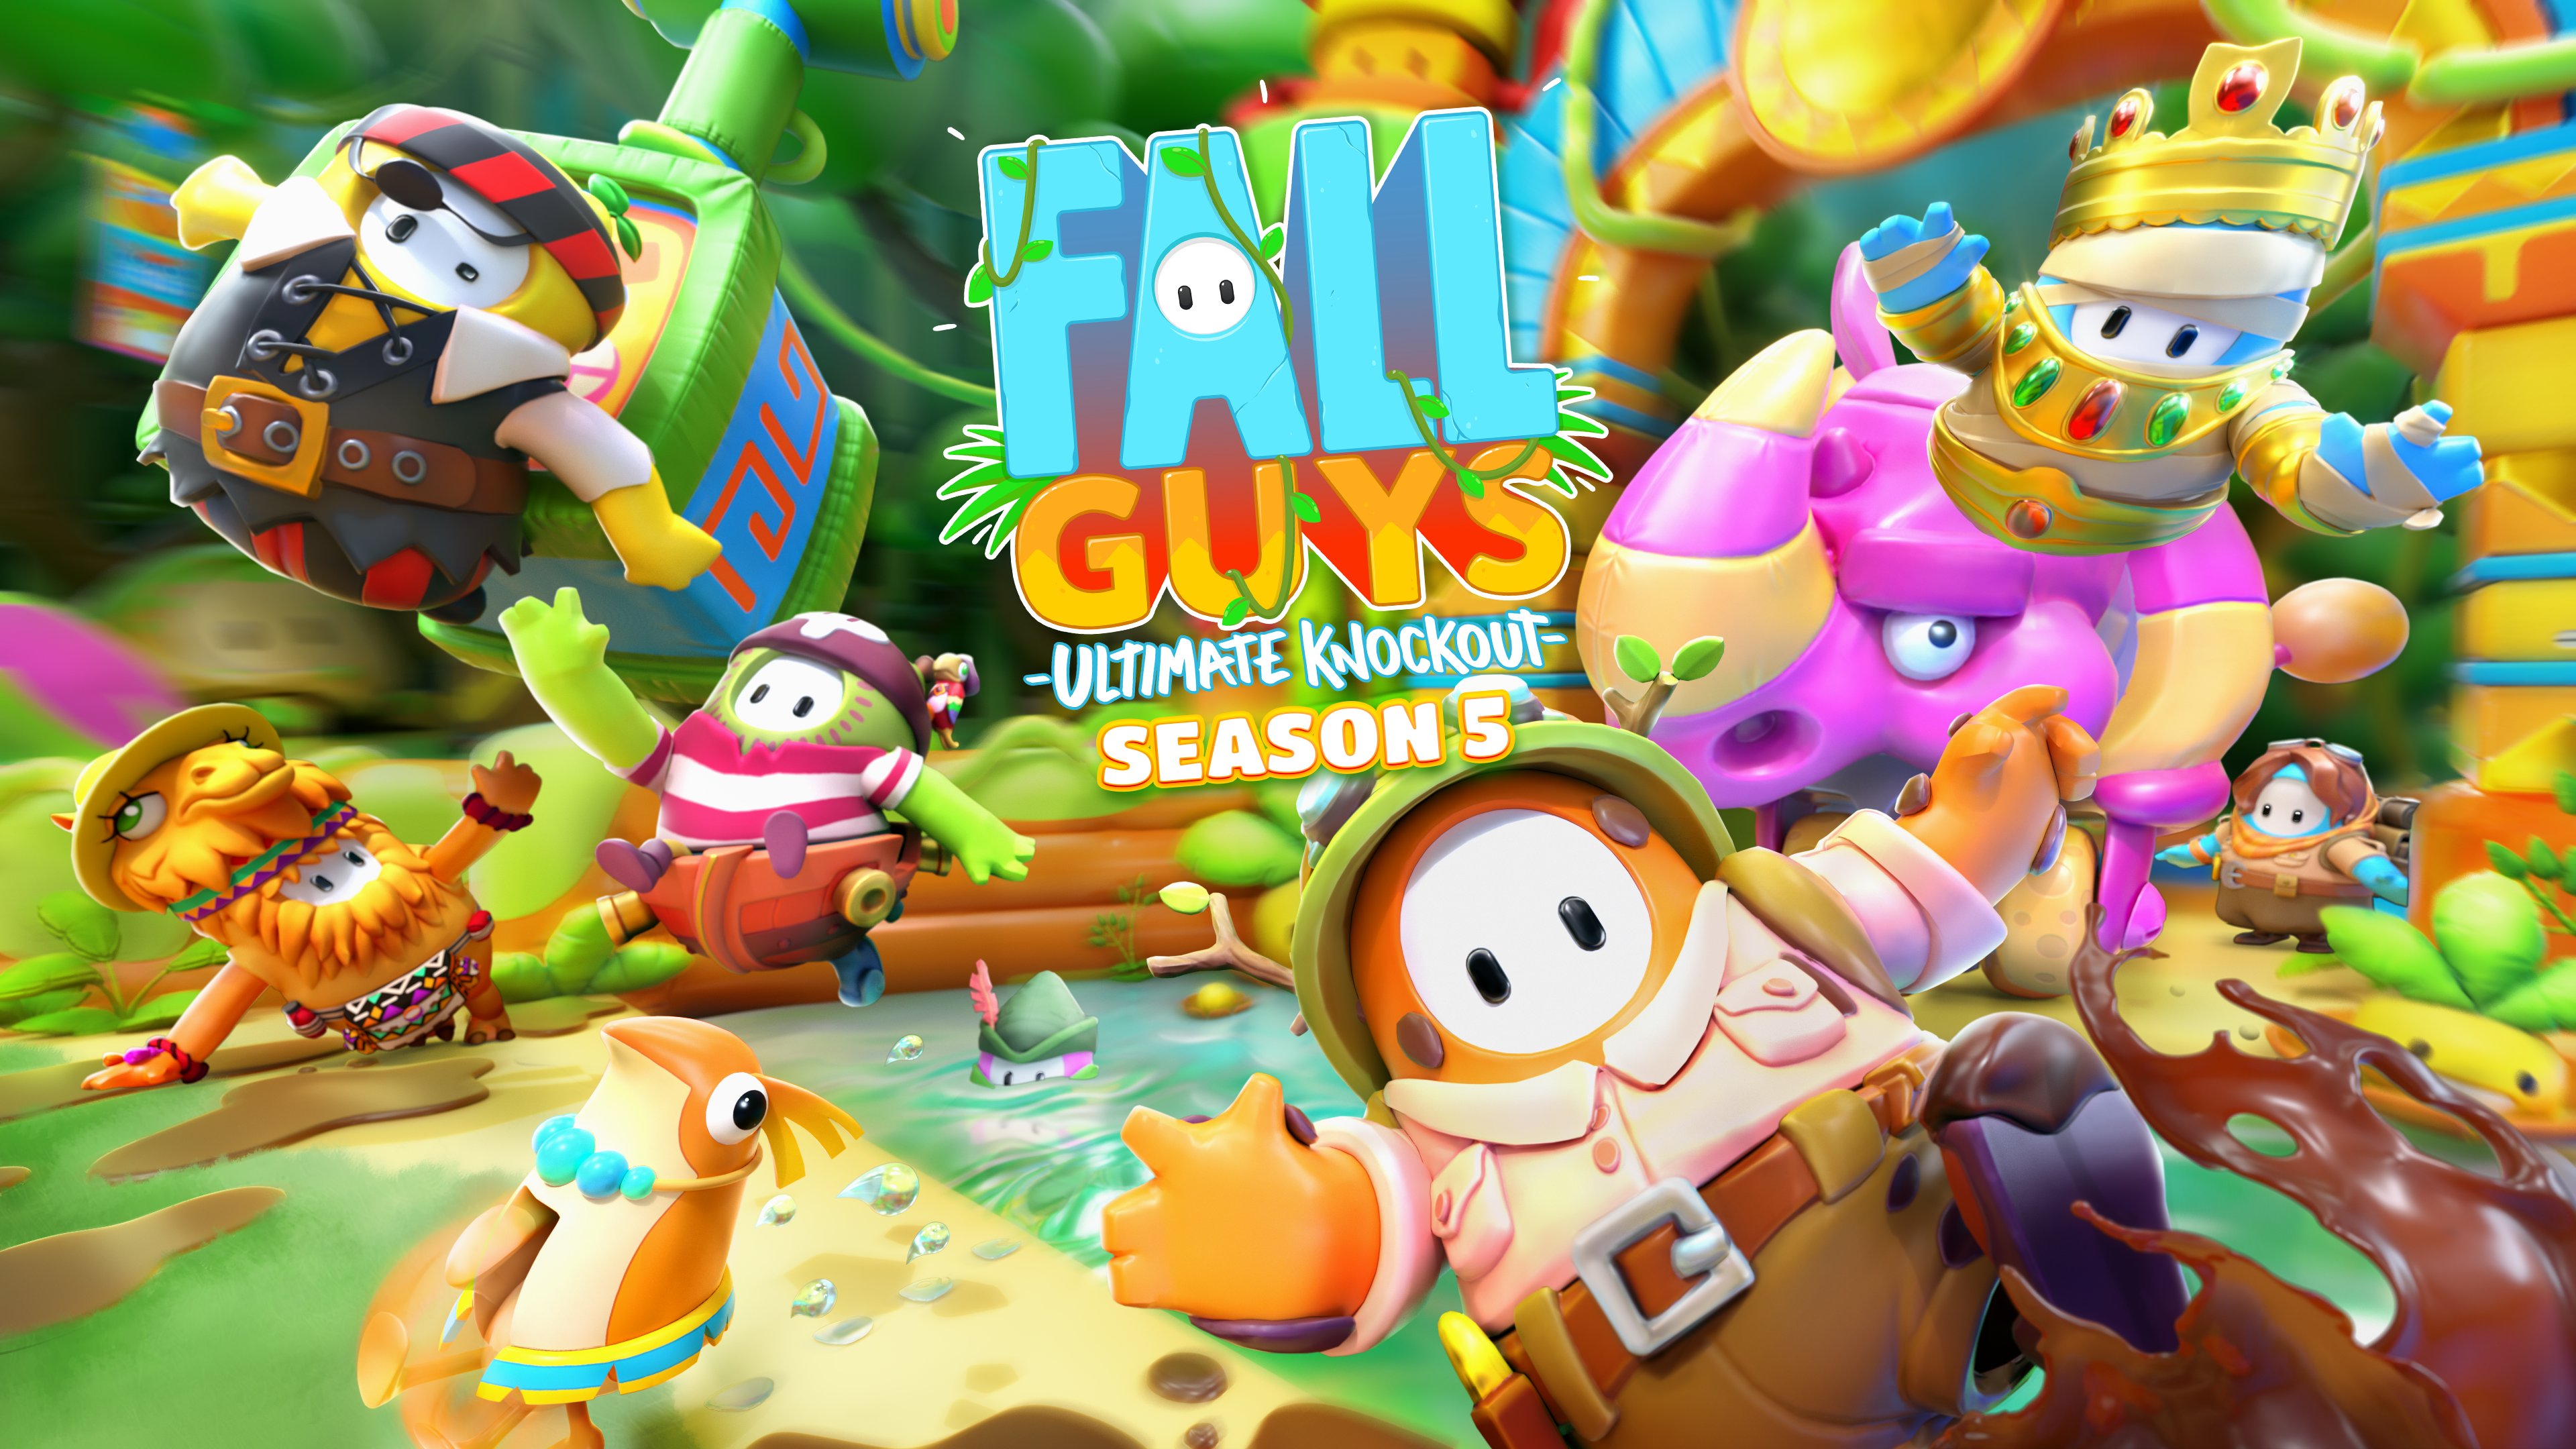 Fall Guys: Ultimate Knockdown may launch on iOS and Android